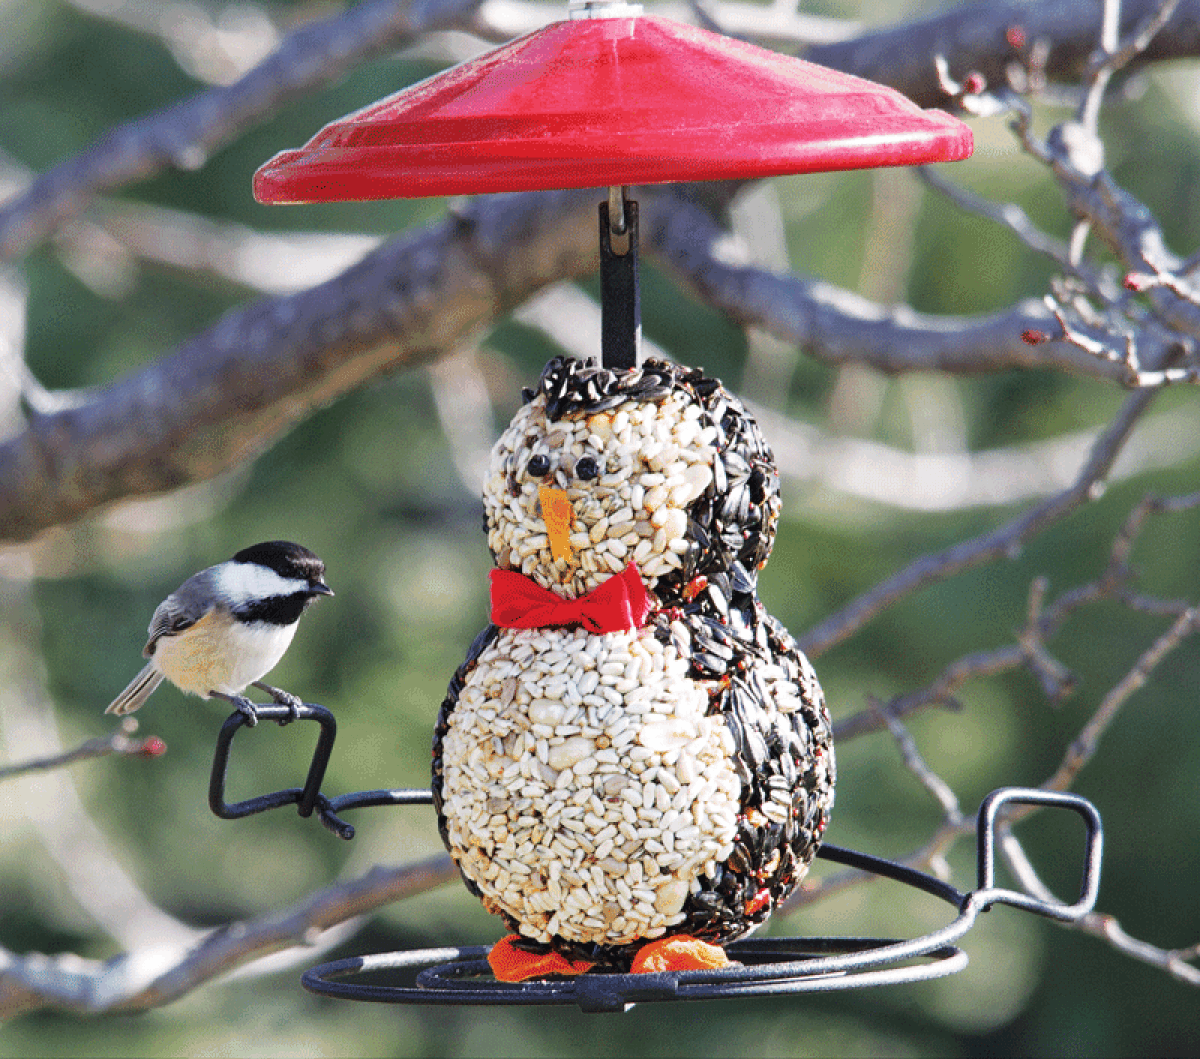  Bob Gors, of Wild Birds Unlimited Macomb, will make a presentation about helping birds survive Michigan winters  at a Shelby Gardeners Club event Nov. 9. A black-capped chickadee prepares to take a seed from the Preston the Penguin bird feeder. 